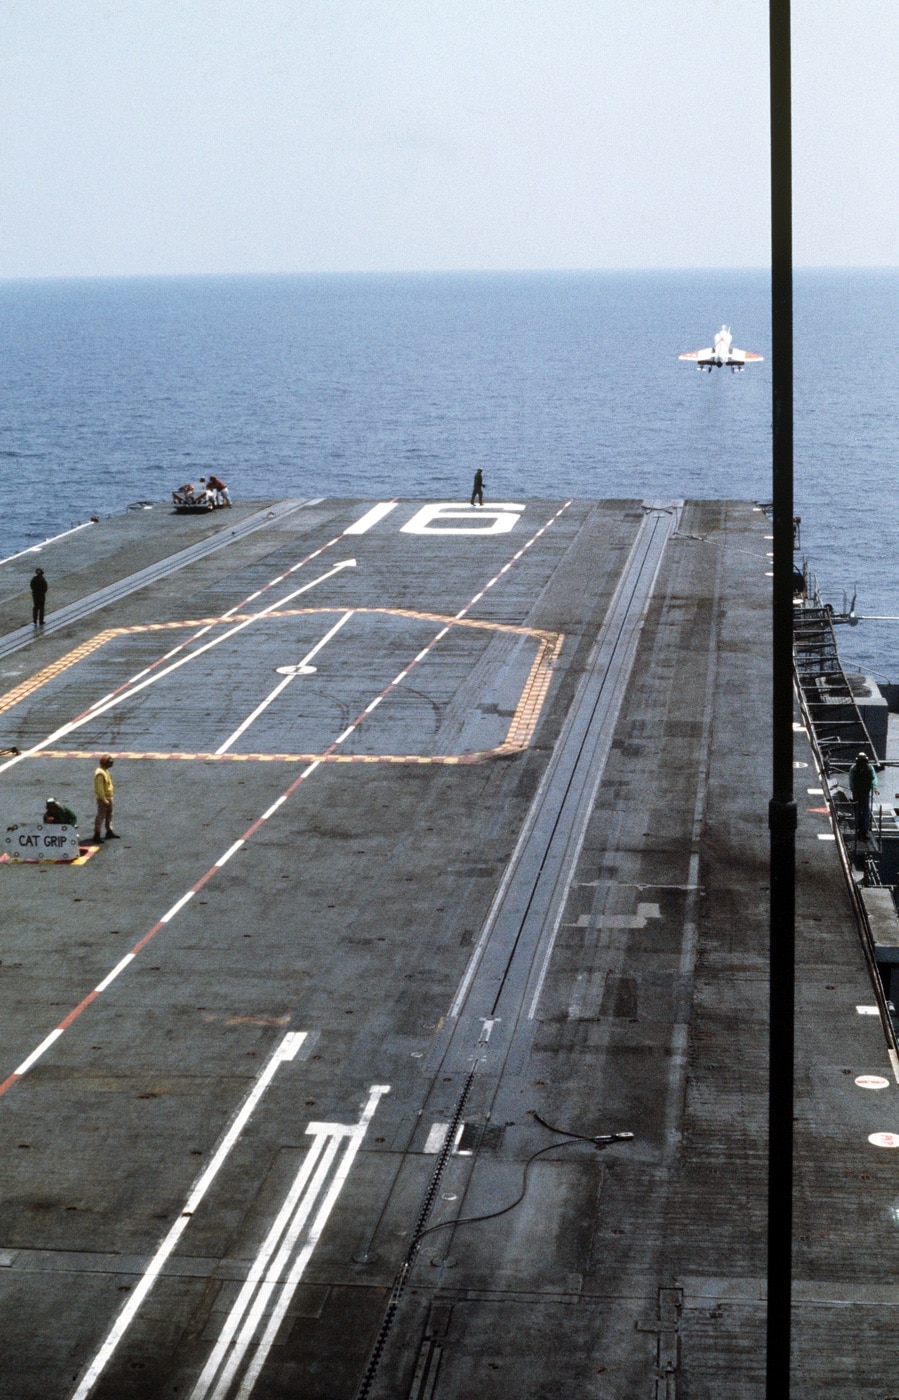 ta-4j skyhawk attack plane launches from the catapult of the uss lexington in october 1985